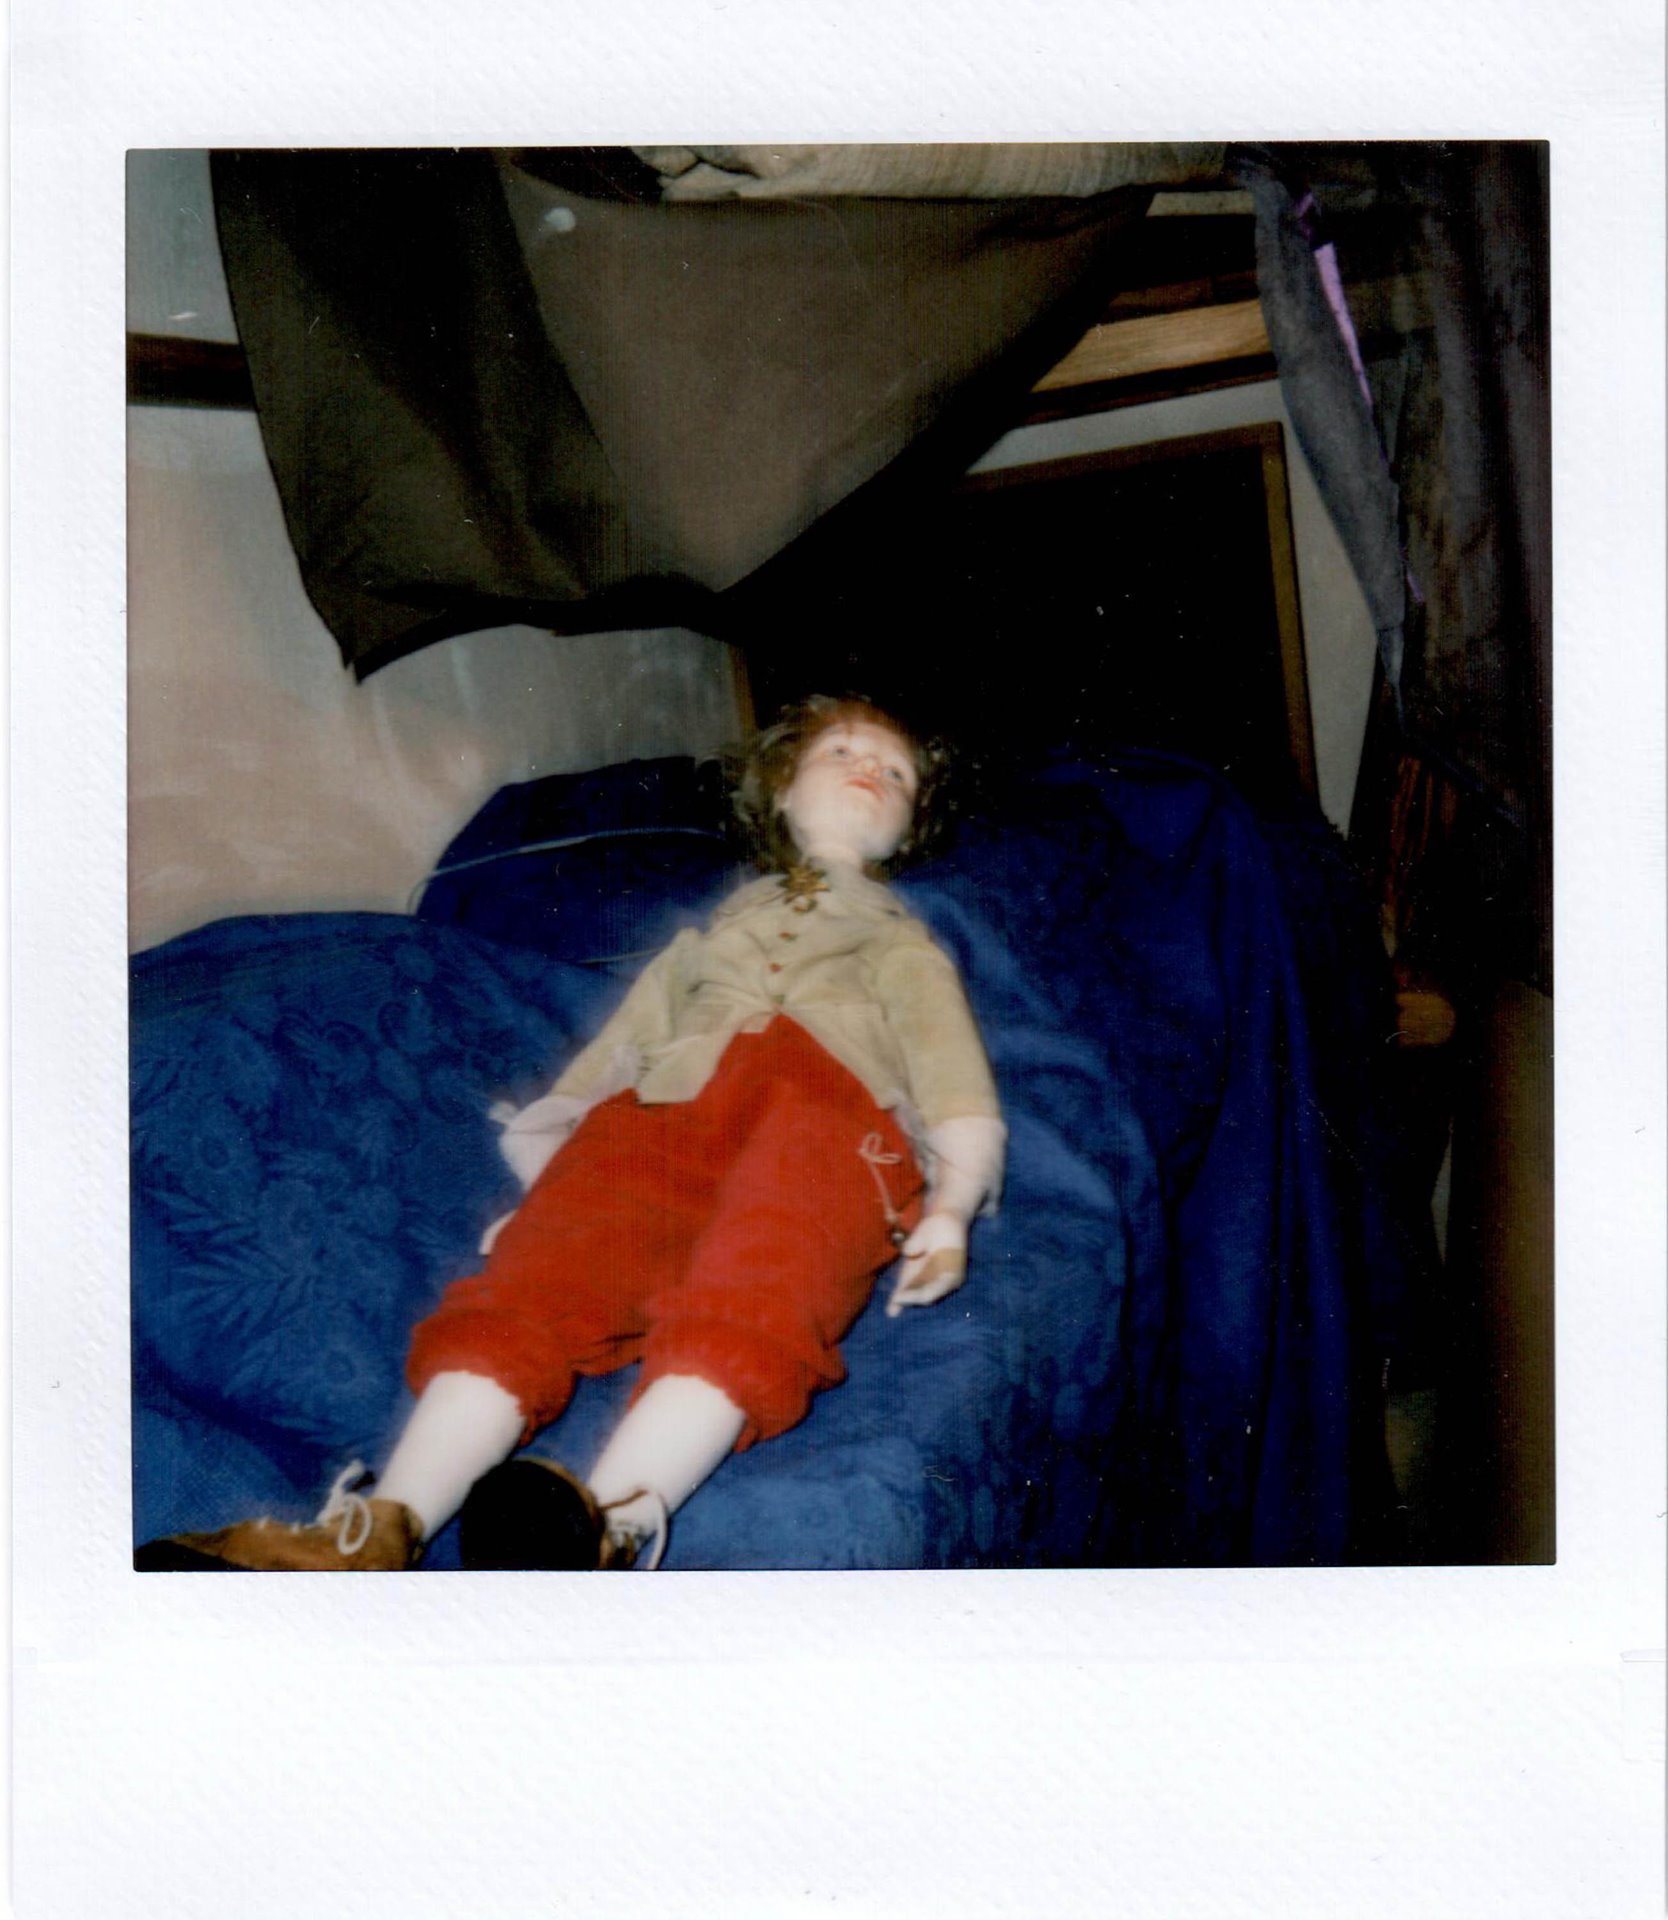 The doll of the Little Prince, used in the Svetlana residents&rsquo; production of <em>The Little Prince</em>, in a photograph taken by Tatyana.